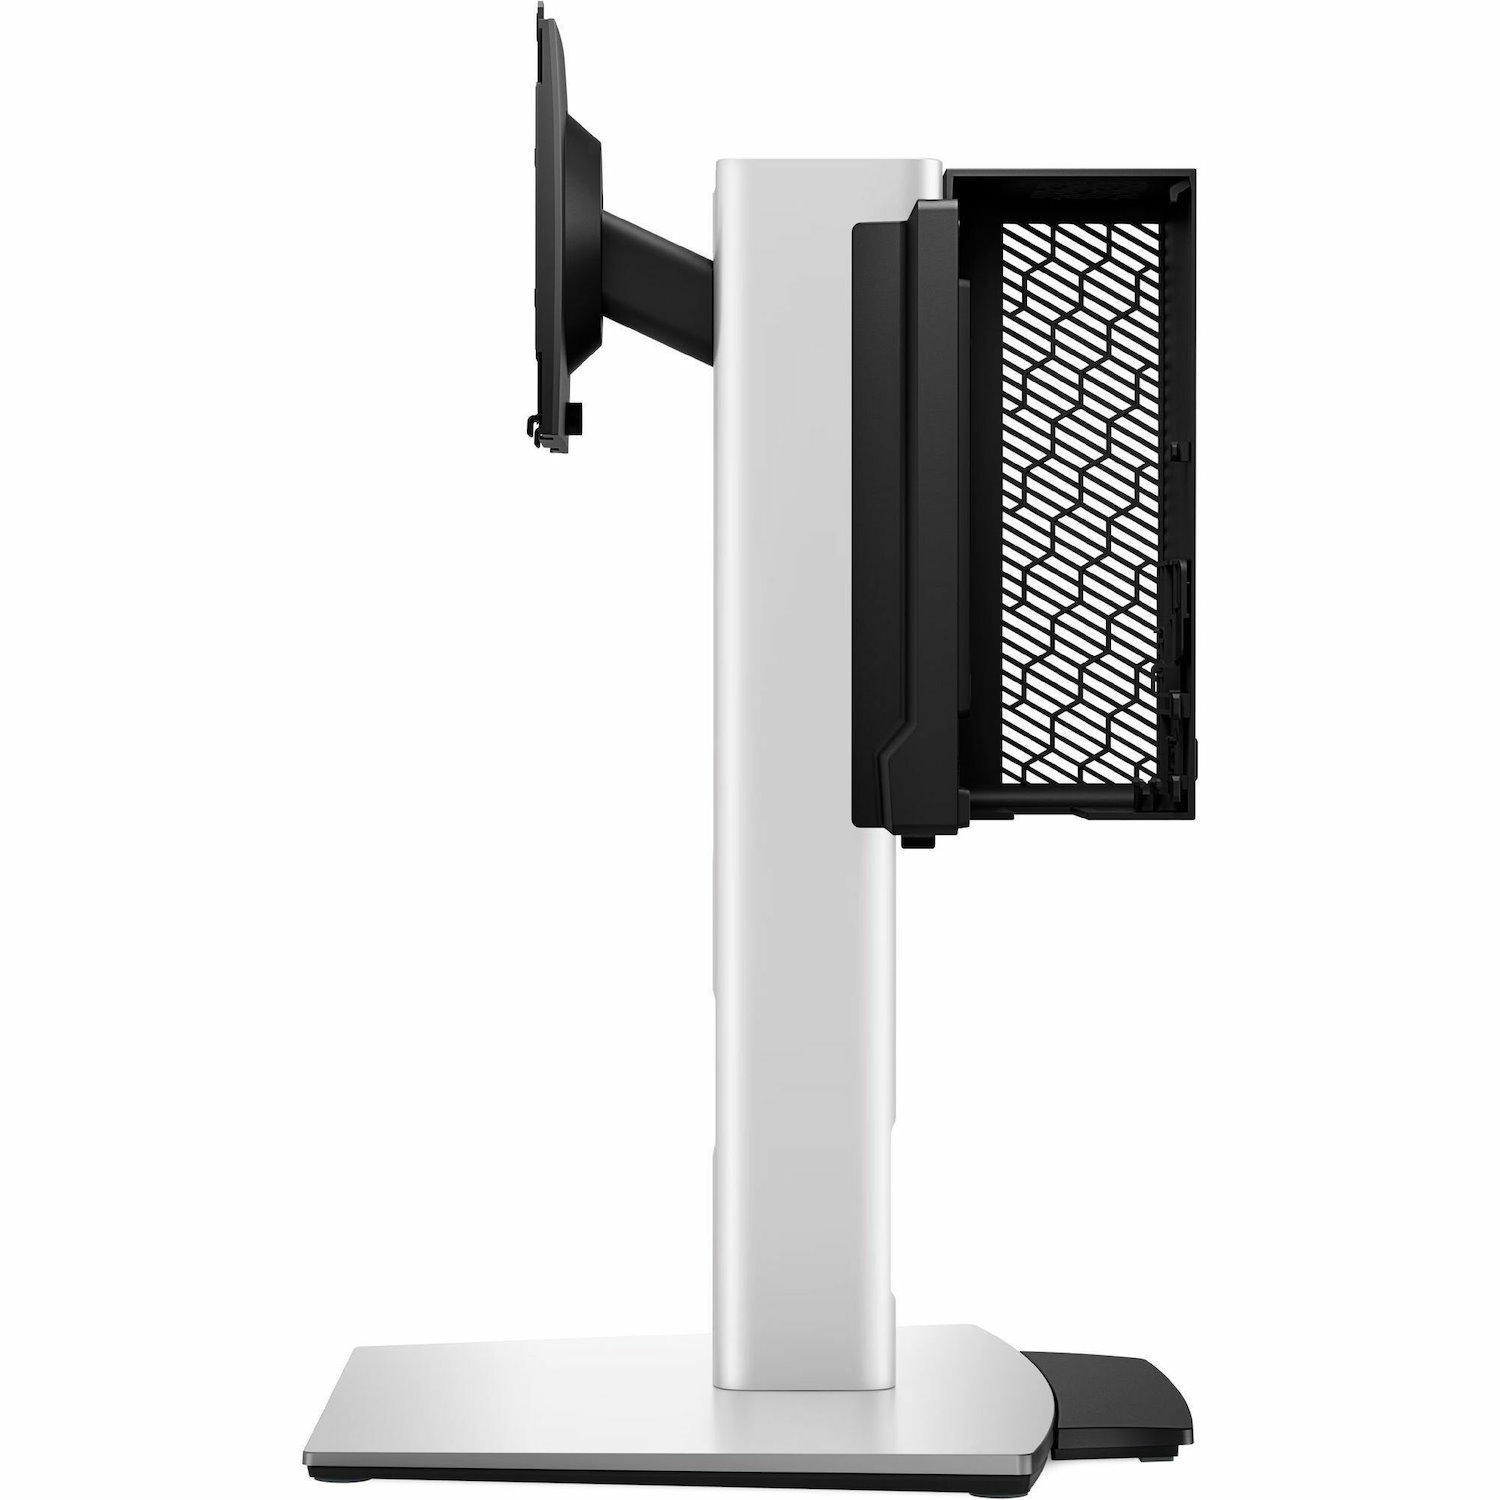 Dell Compact Form Factor All-in-One Stand - CFS25